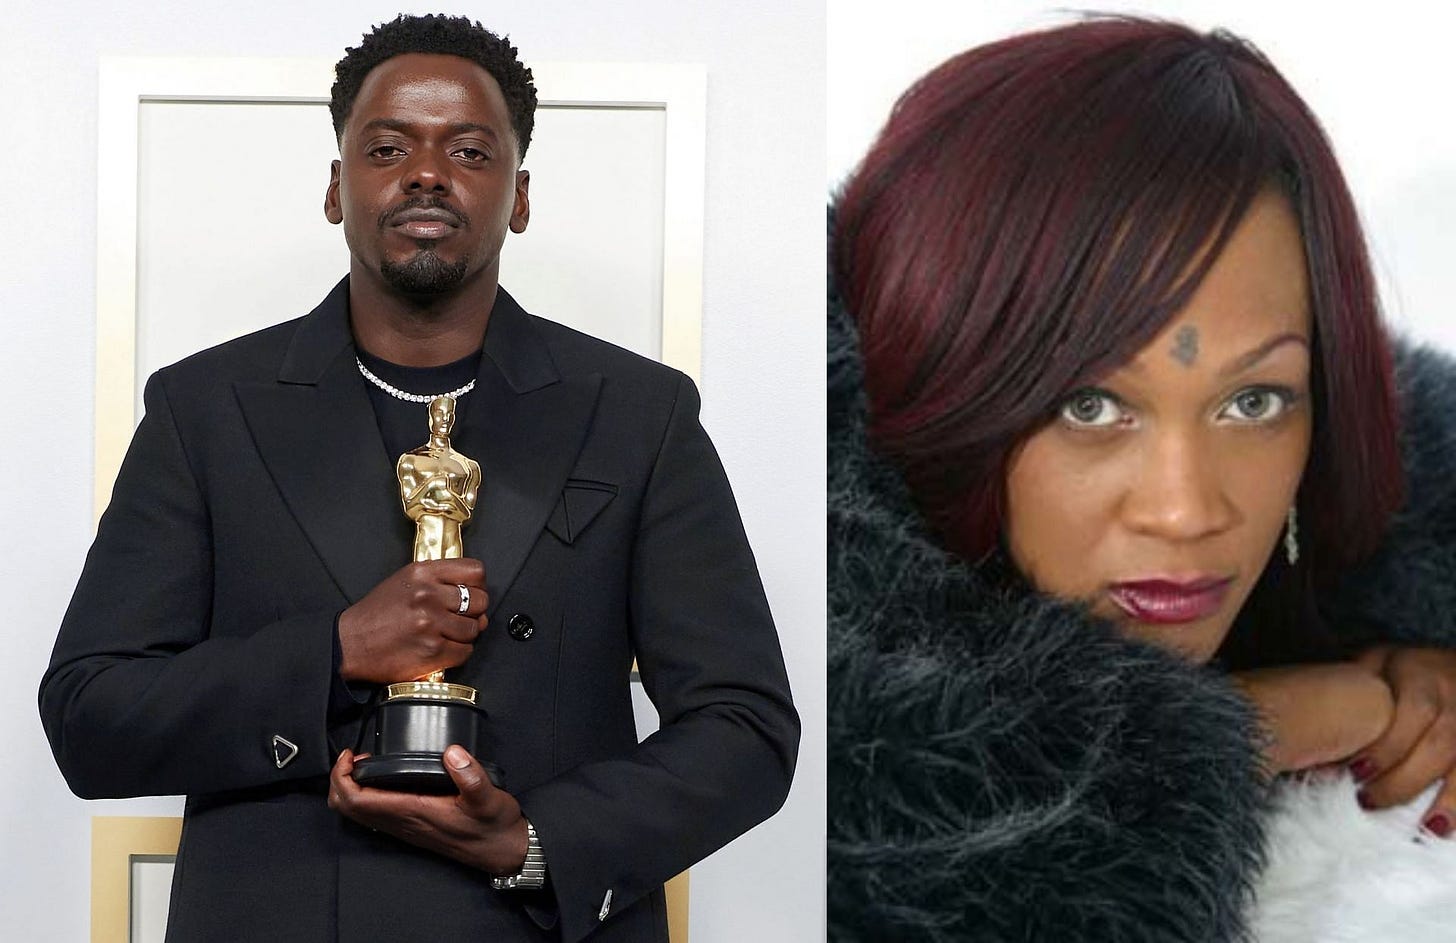 Who is Heir Holiness? 'Get Out' star Daniel Kaluuya's friends and family  concerned over ties to 'life strategist'